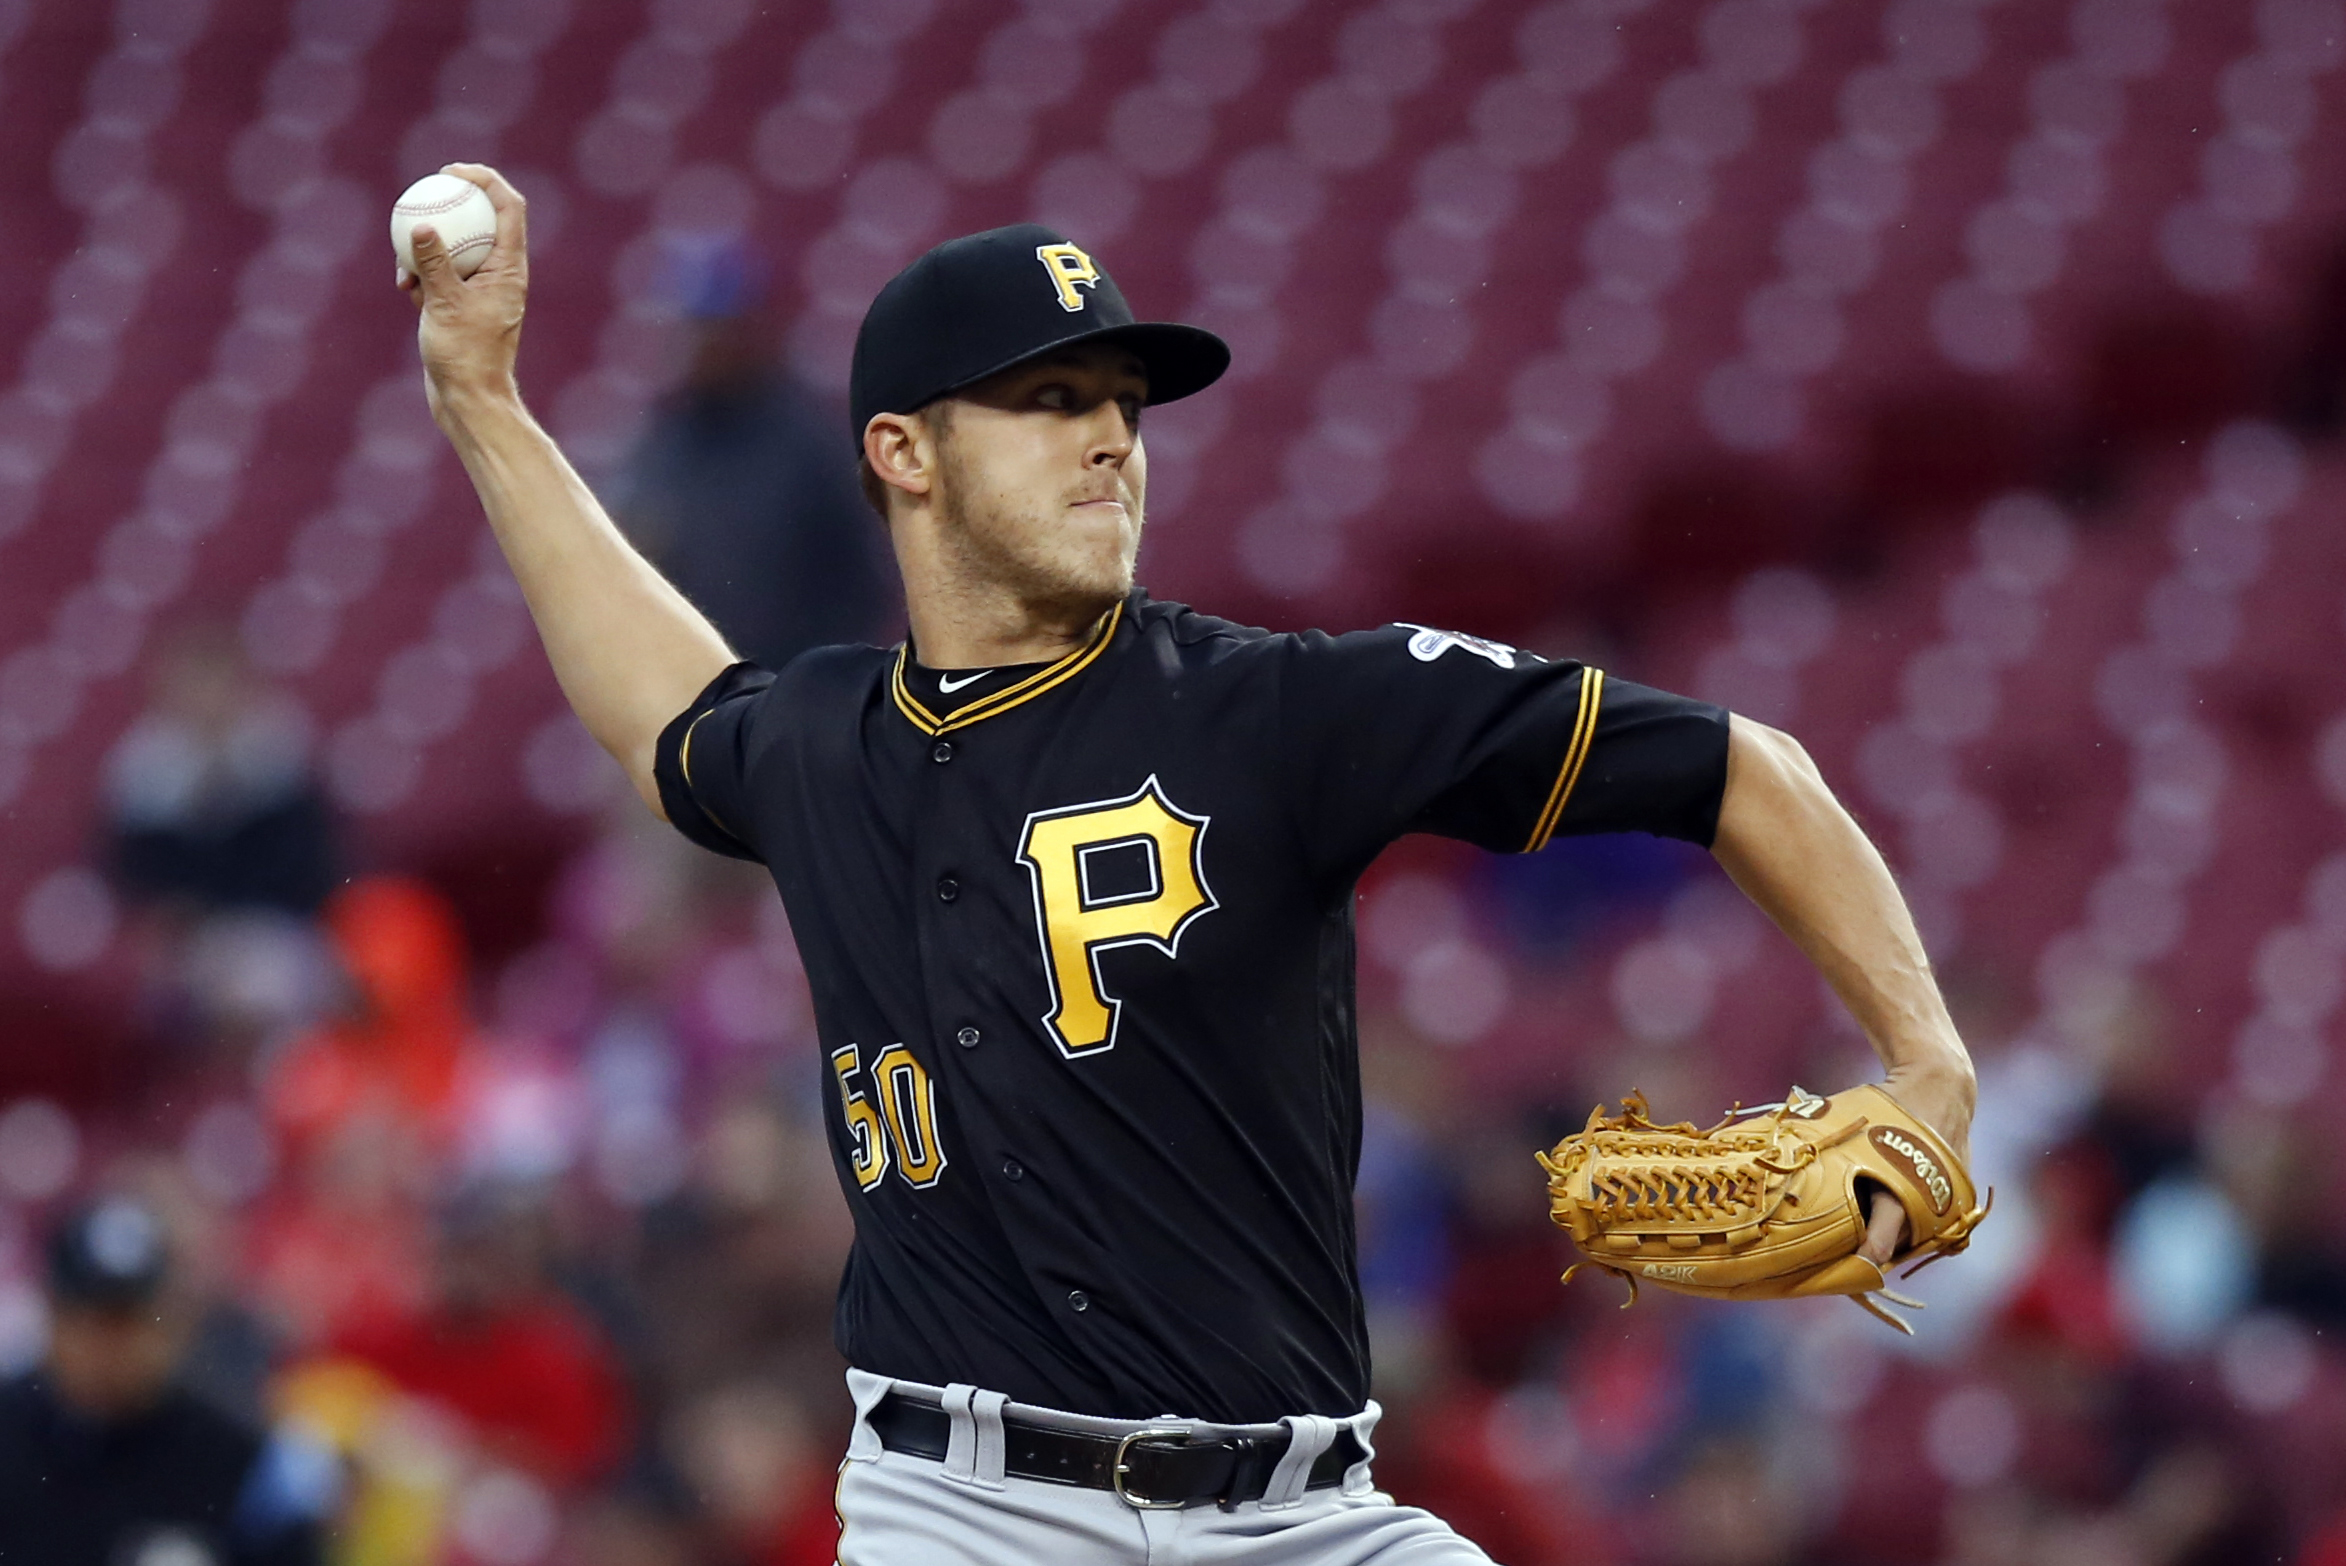 Jameson Taillon set for first rehab start since cancer surgery